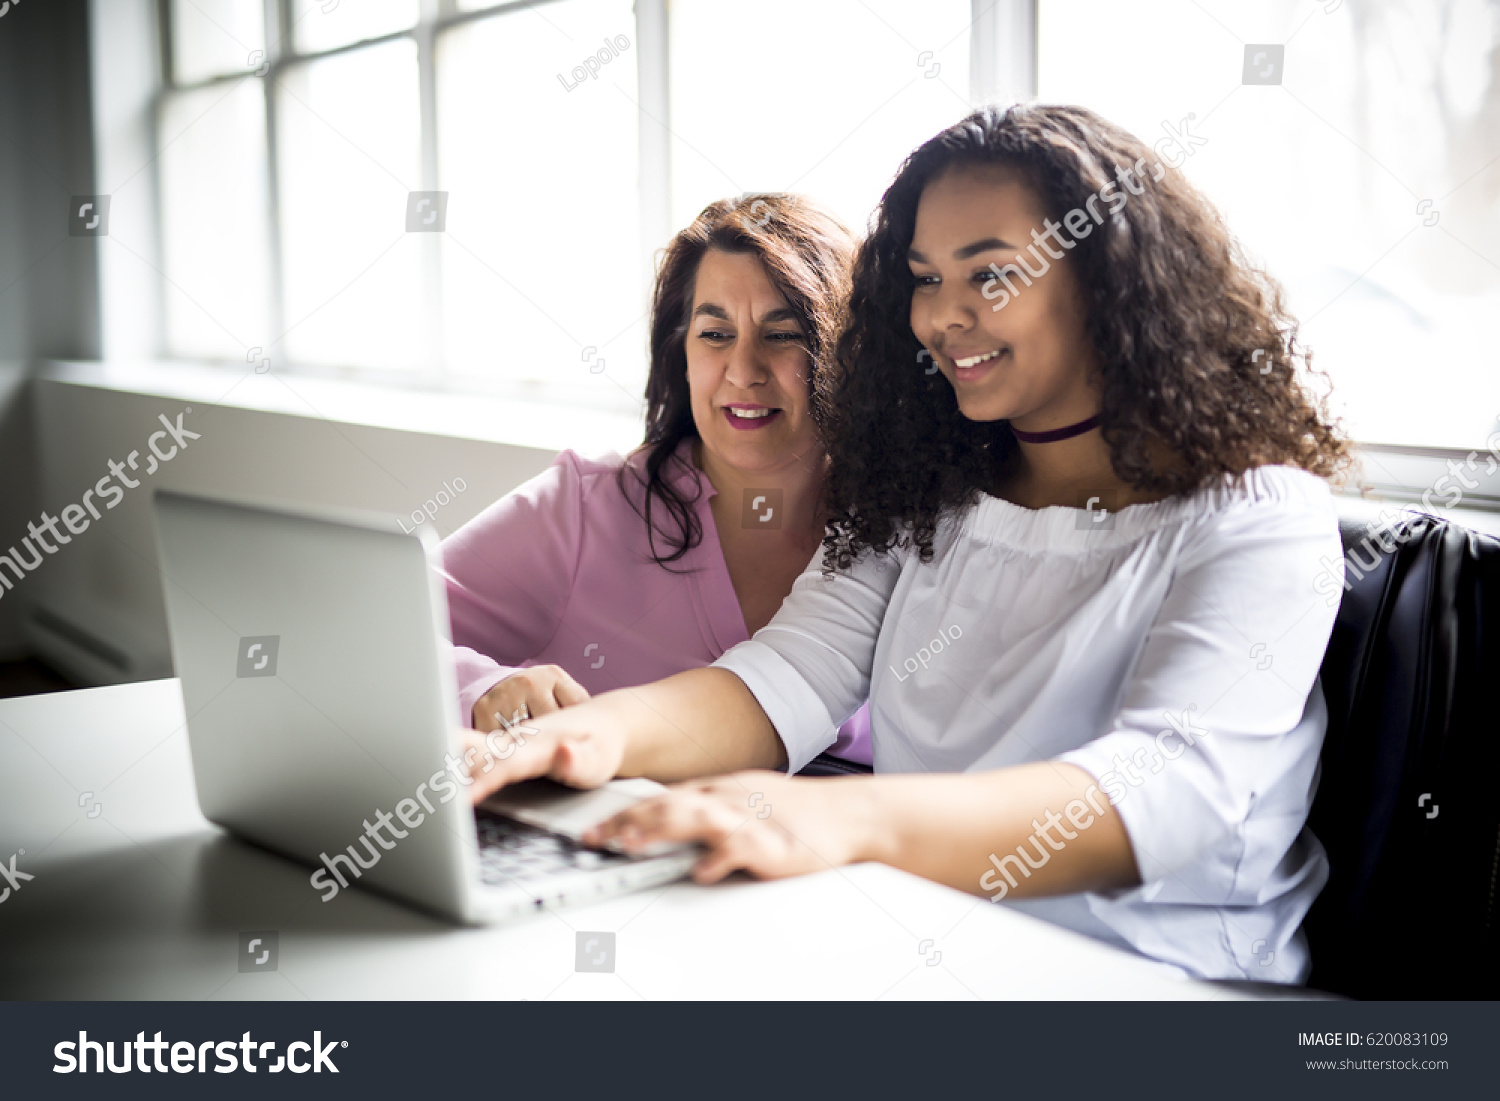 A Mother And Teenage Daughter Looking At Laptop Together #620083109